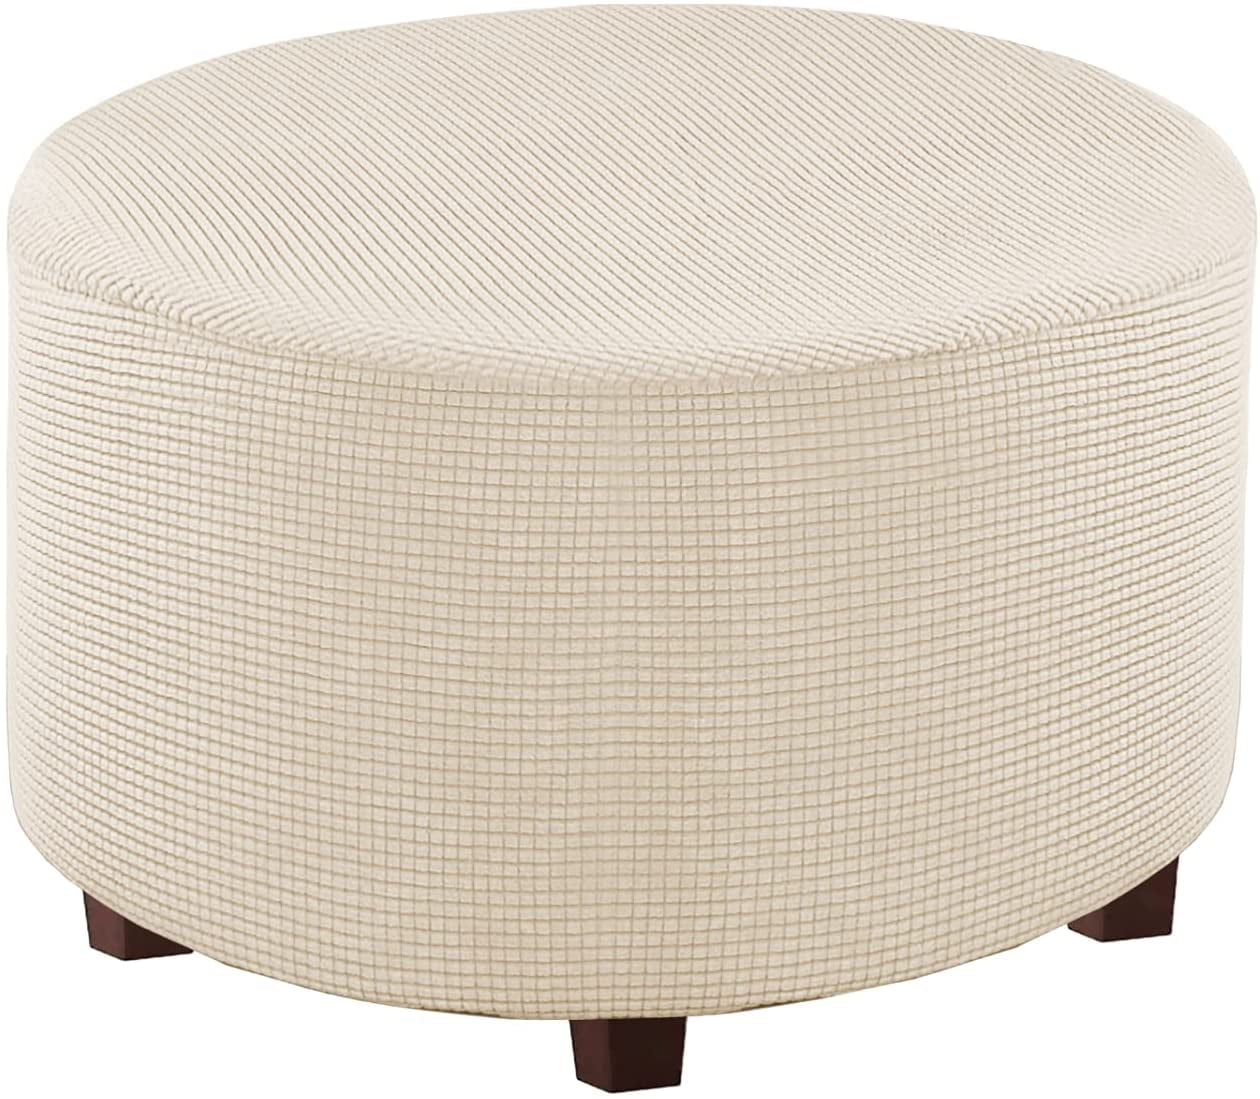 Details about   1-Piece Stretch Storage Ottoman Slipcover Furniture Protector Ottoman Covers 